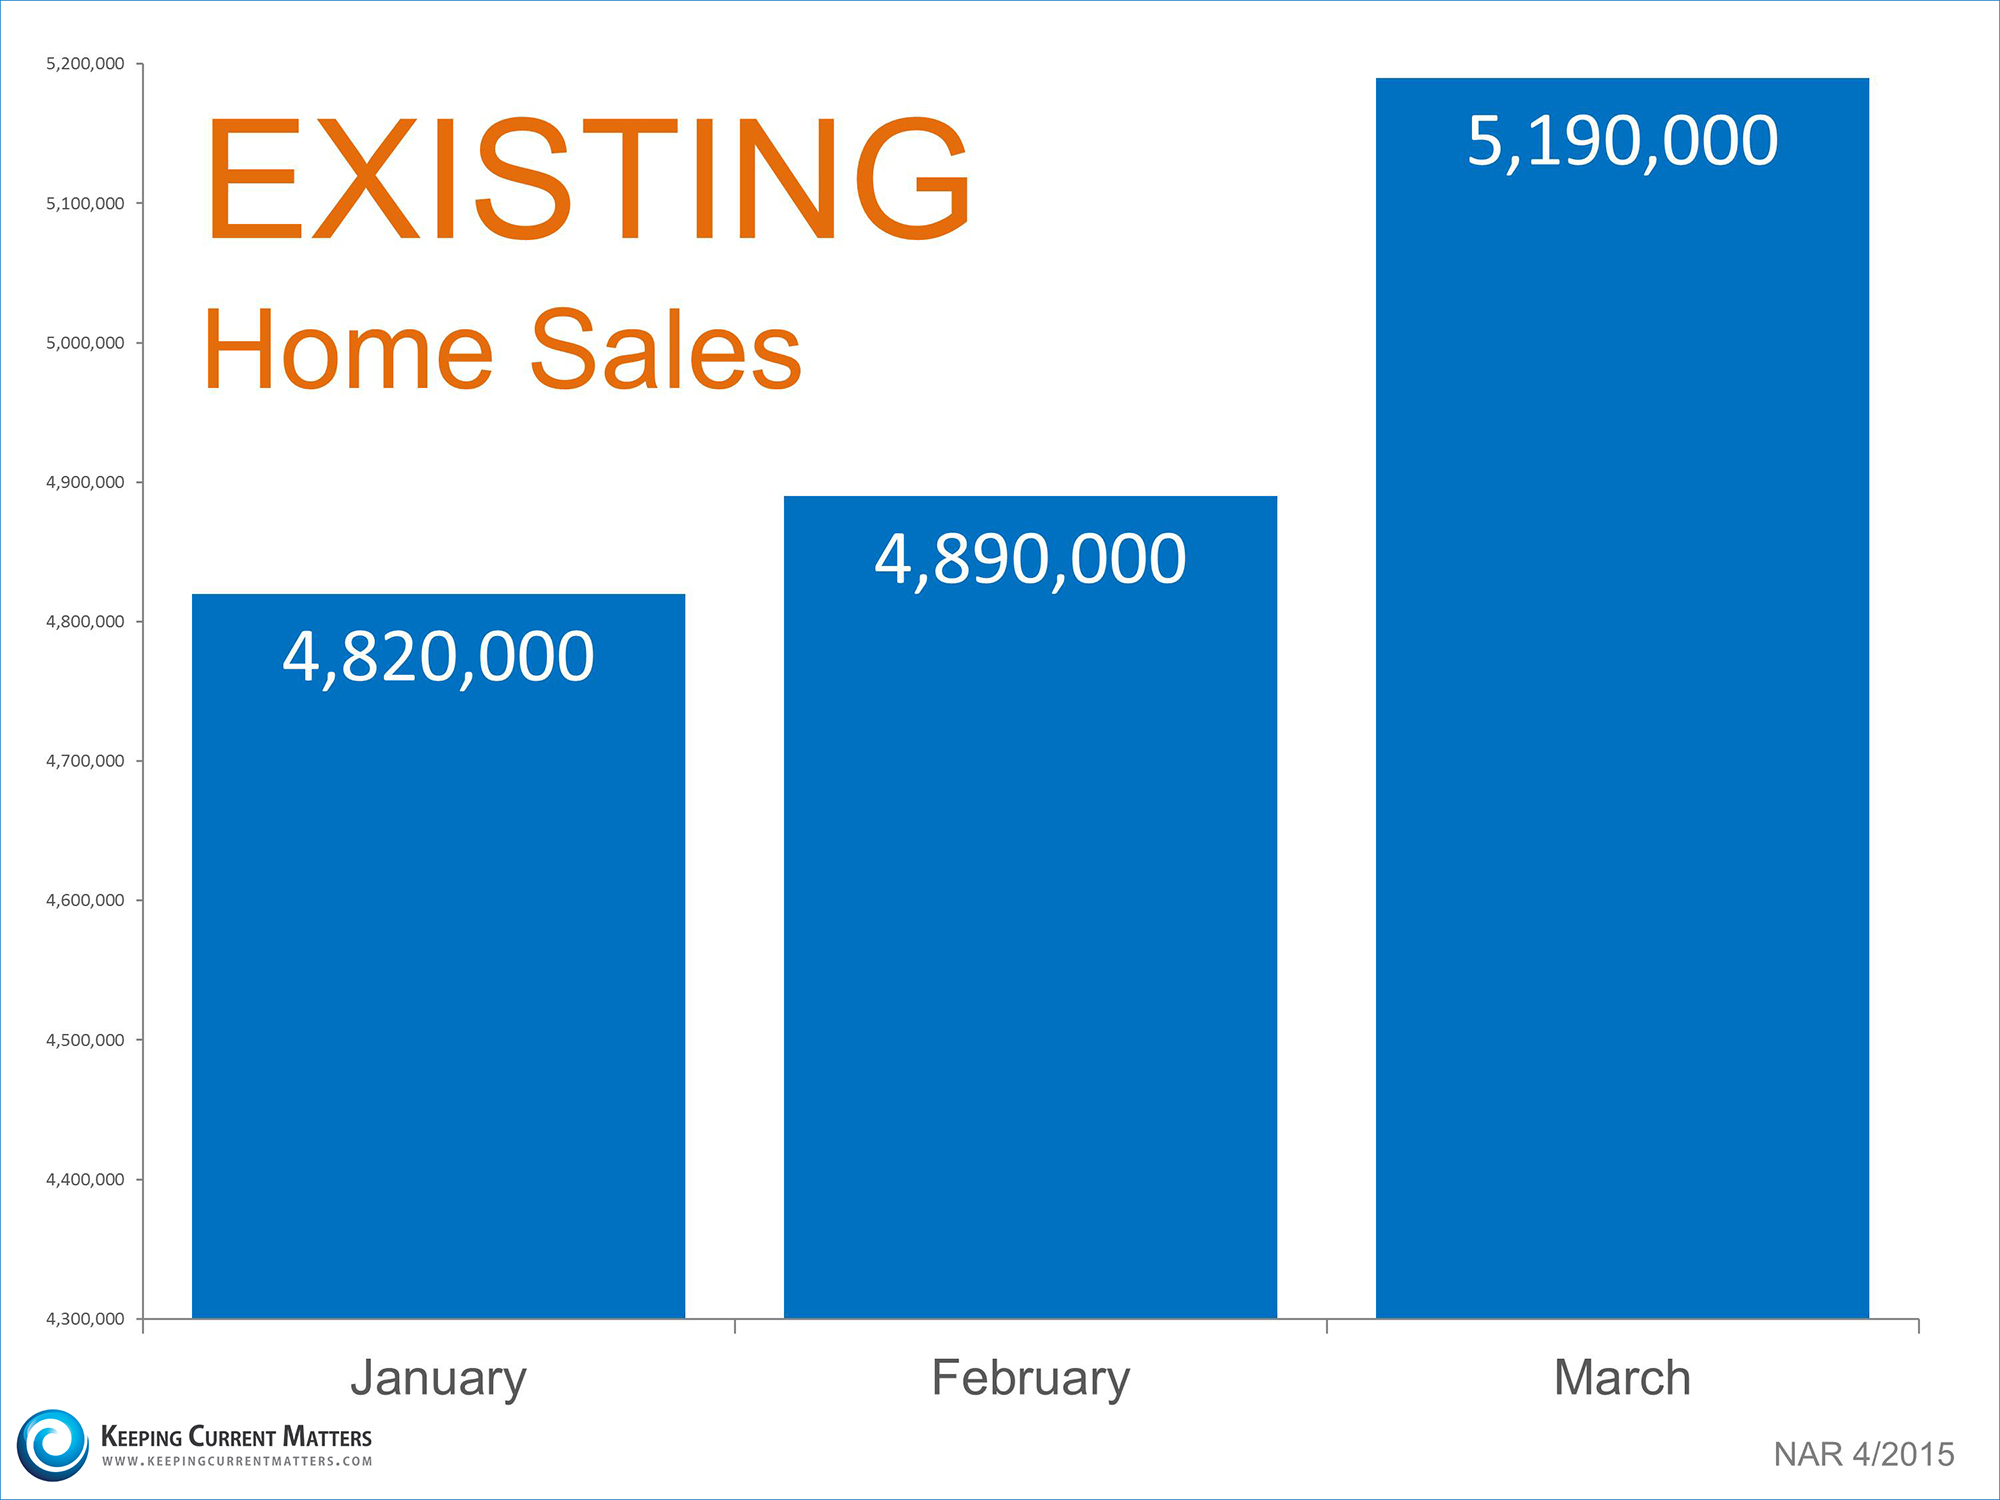 Existing Home Sales | Keeping Current Matters